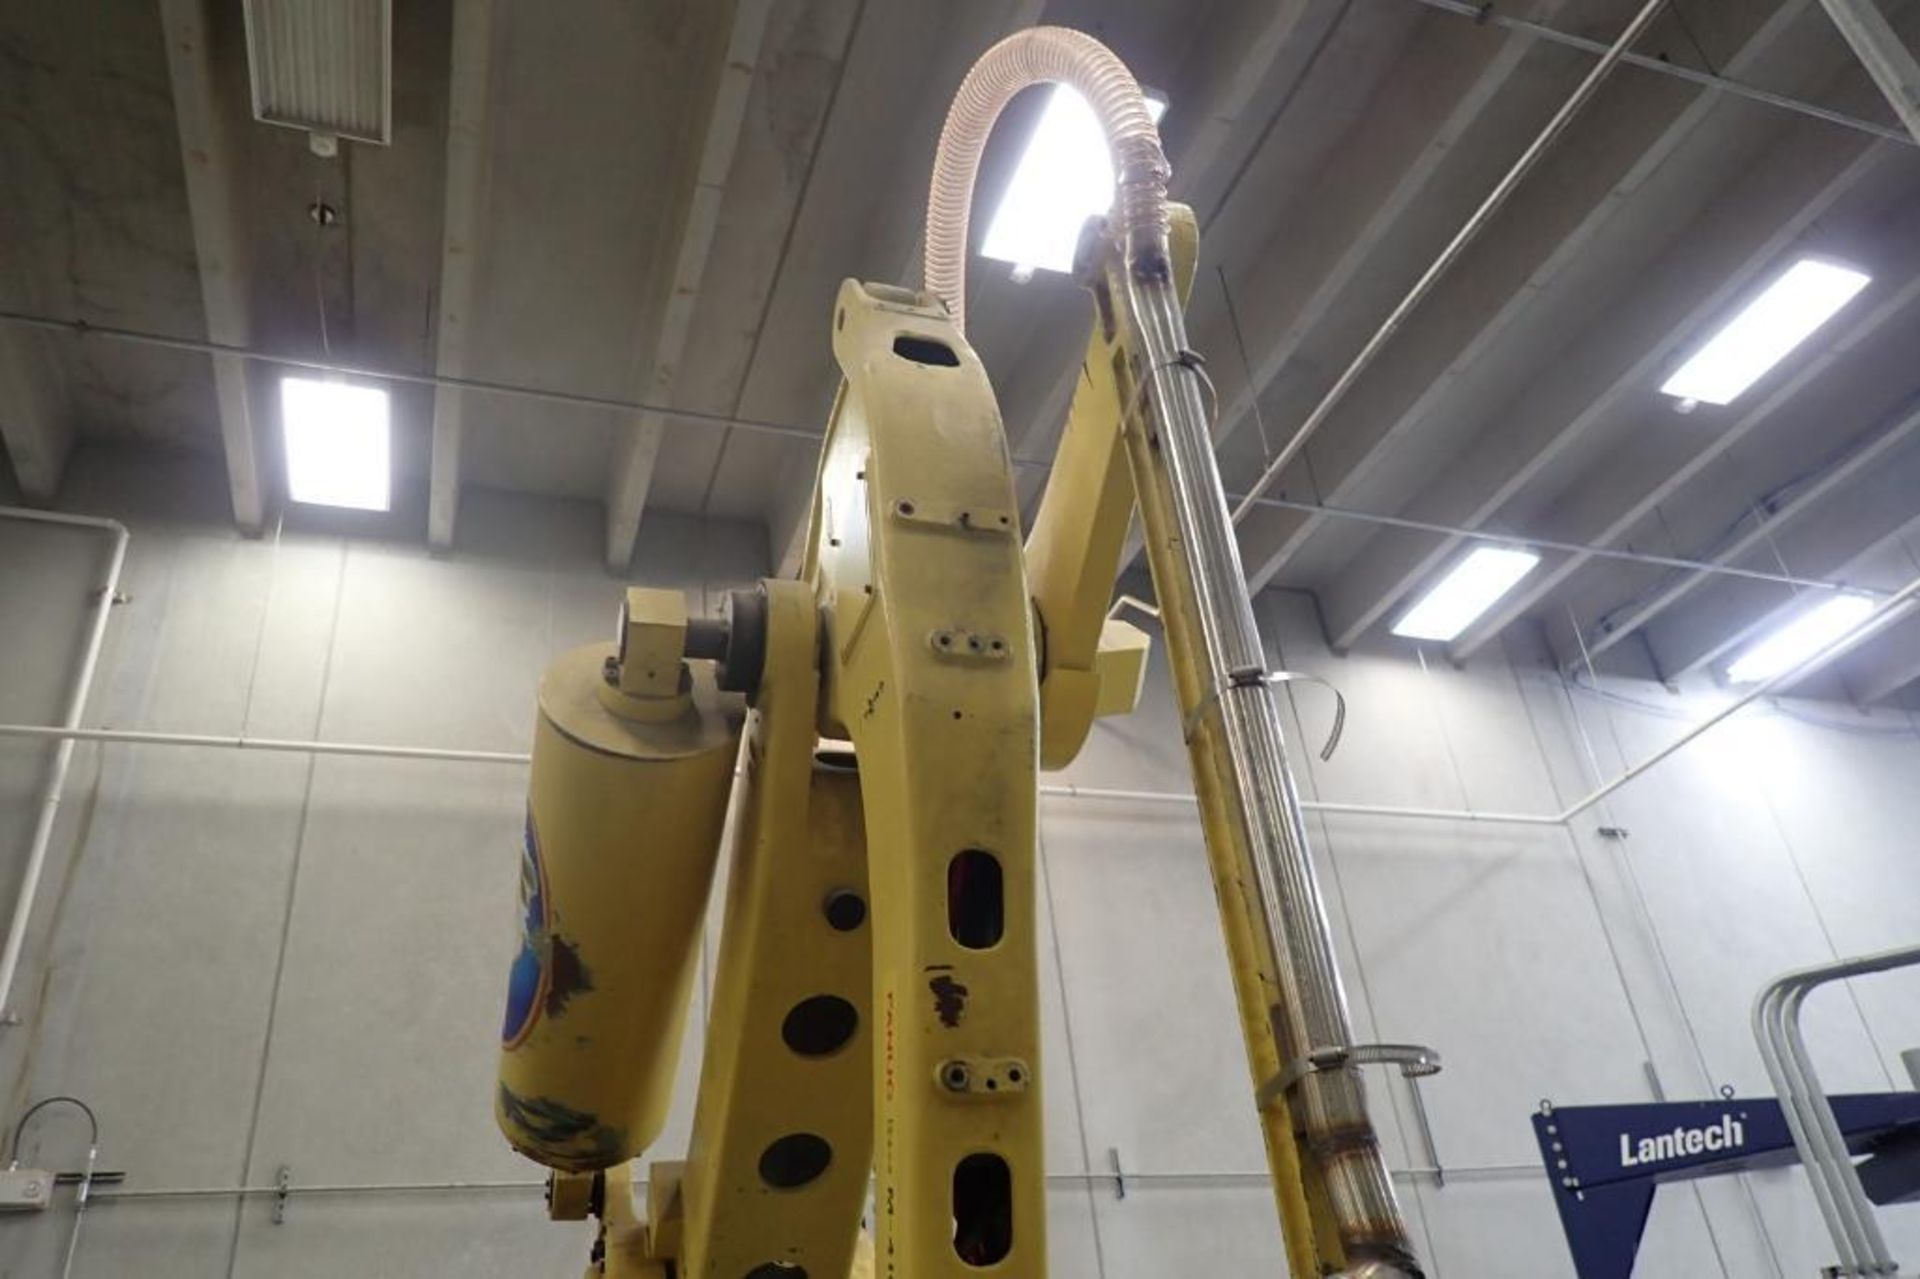 Fanuc palletizing robot model M-410-iB16 with controller and pendant - Image 4 of 12